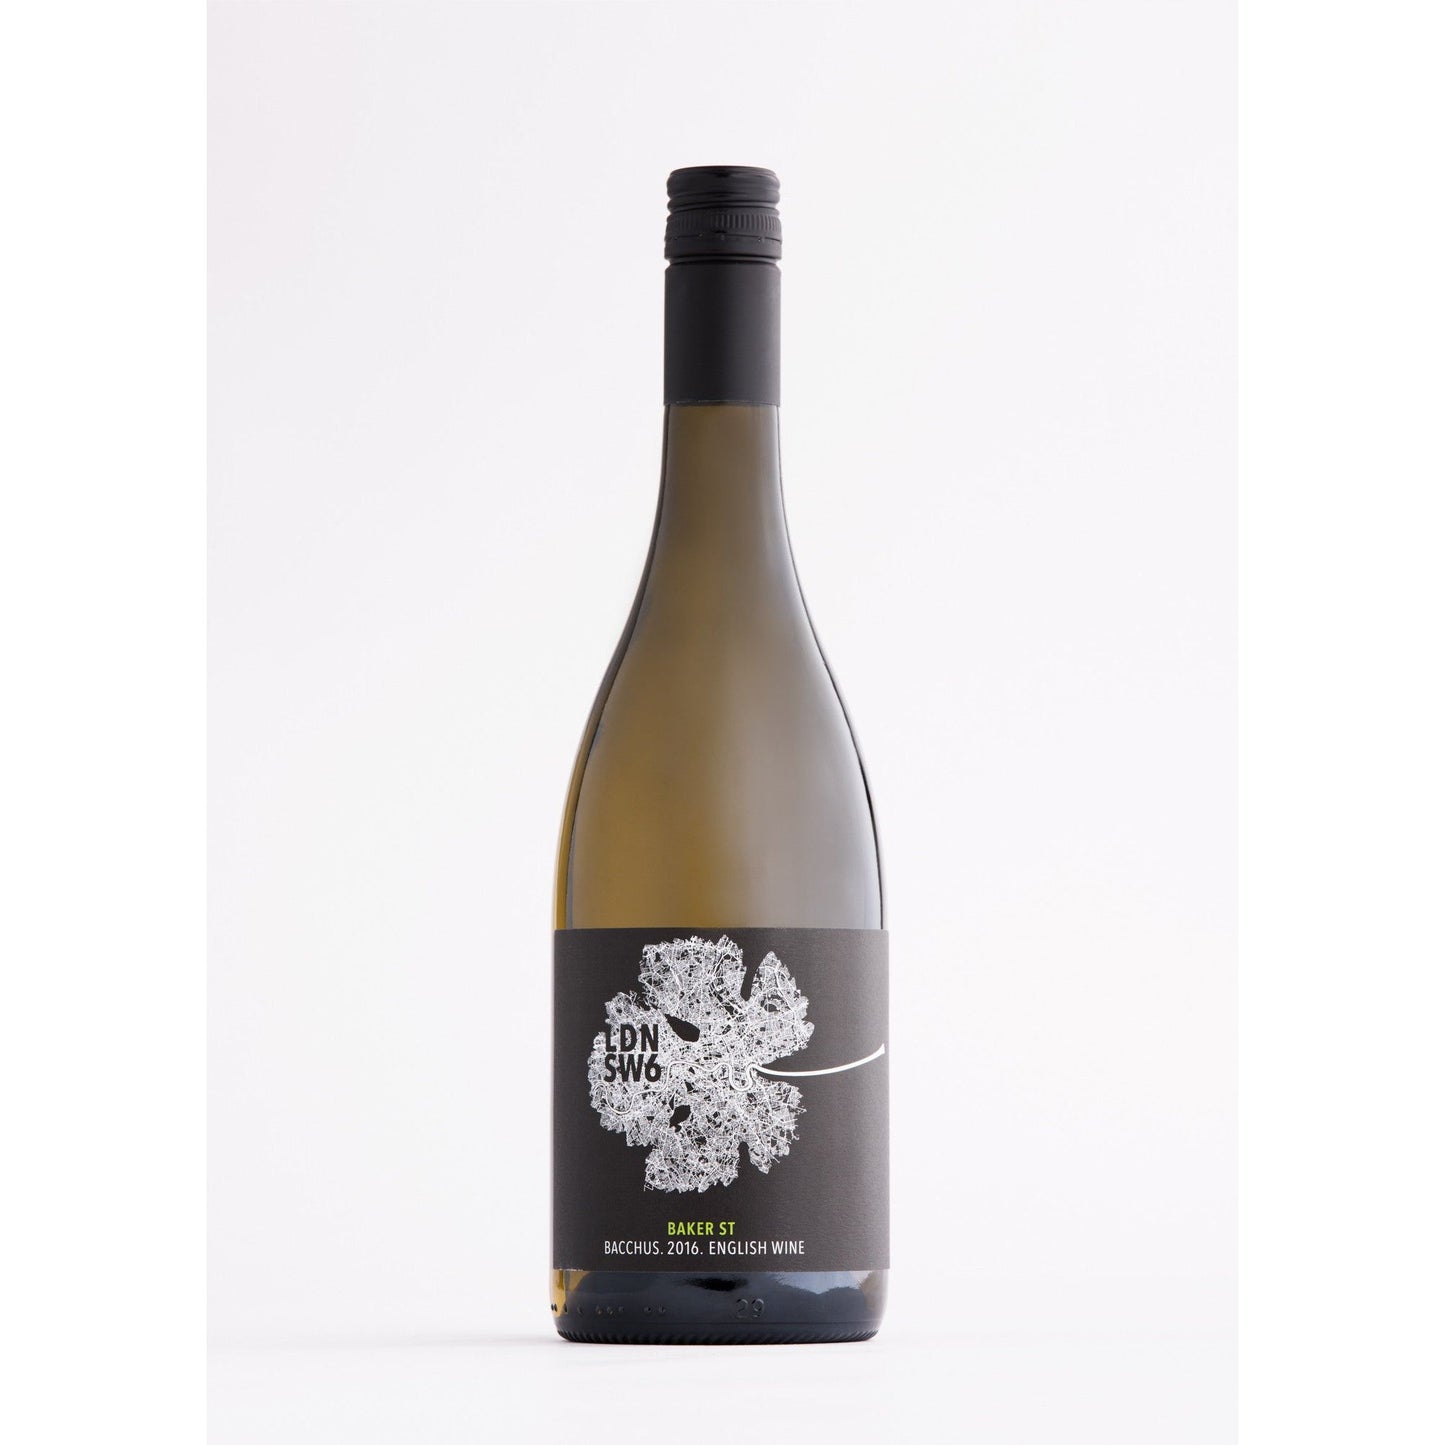 London CRU Baker Street Bacchus white wine from the English Wine Collection